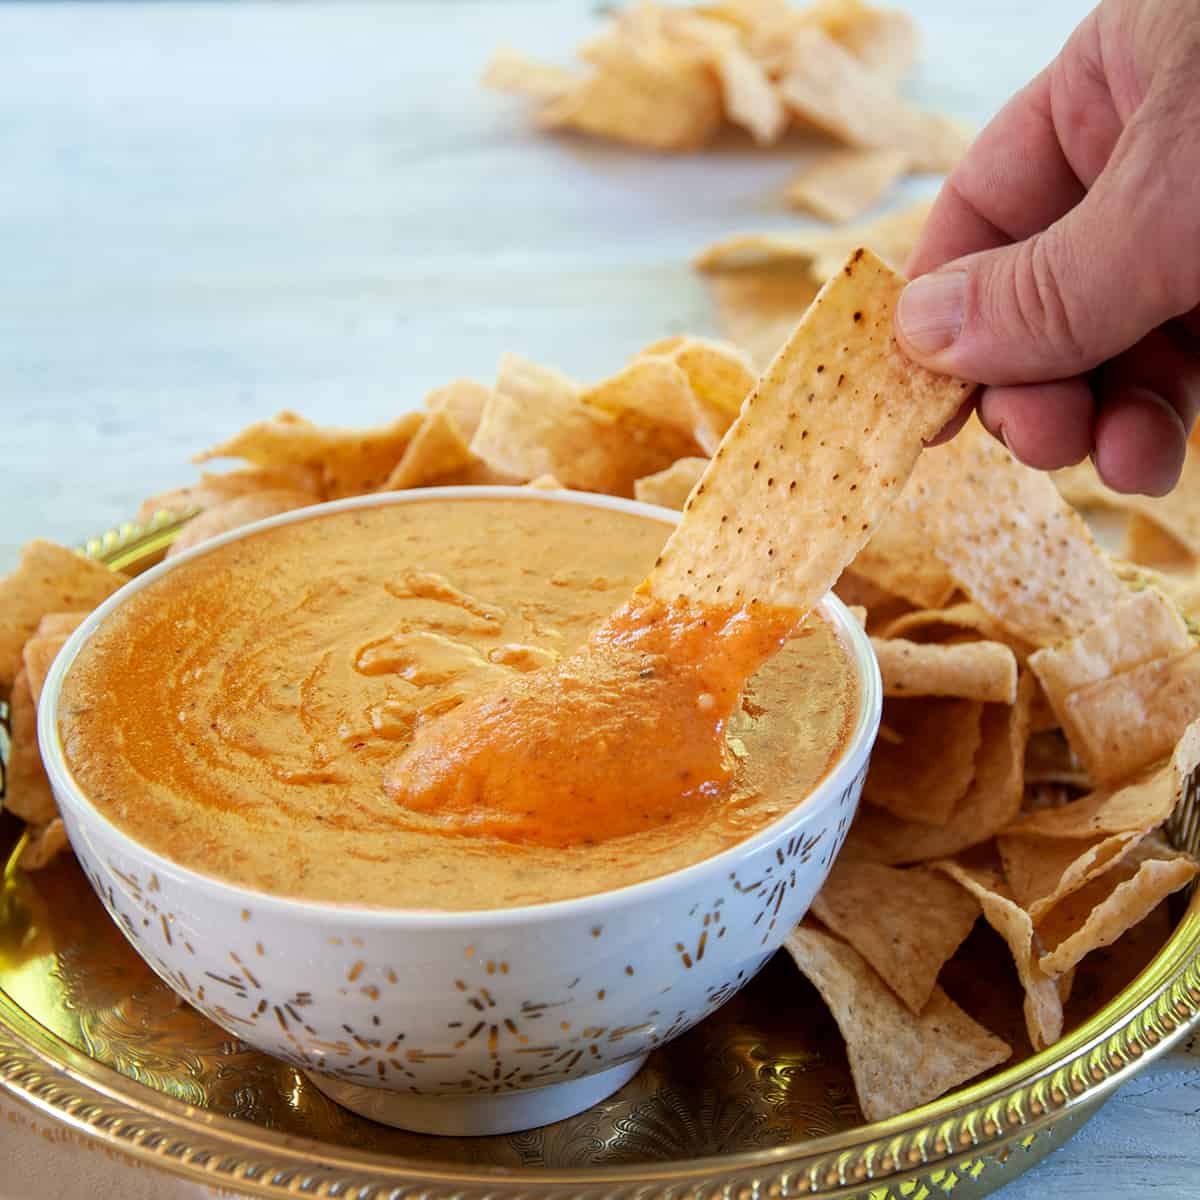 Homemade Queso Dip in a white and gold bowl and a hand dipping a single corn chip into it.